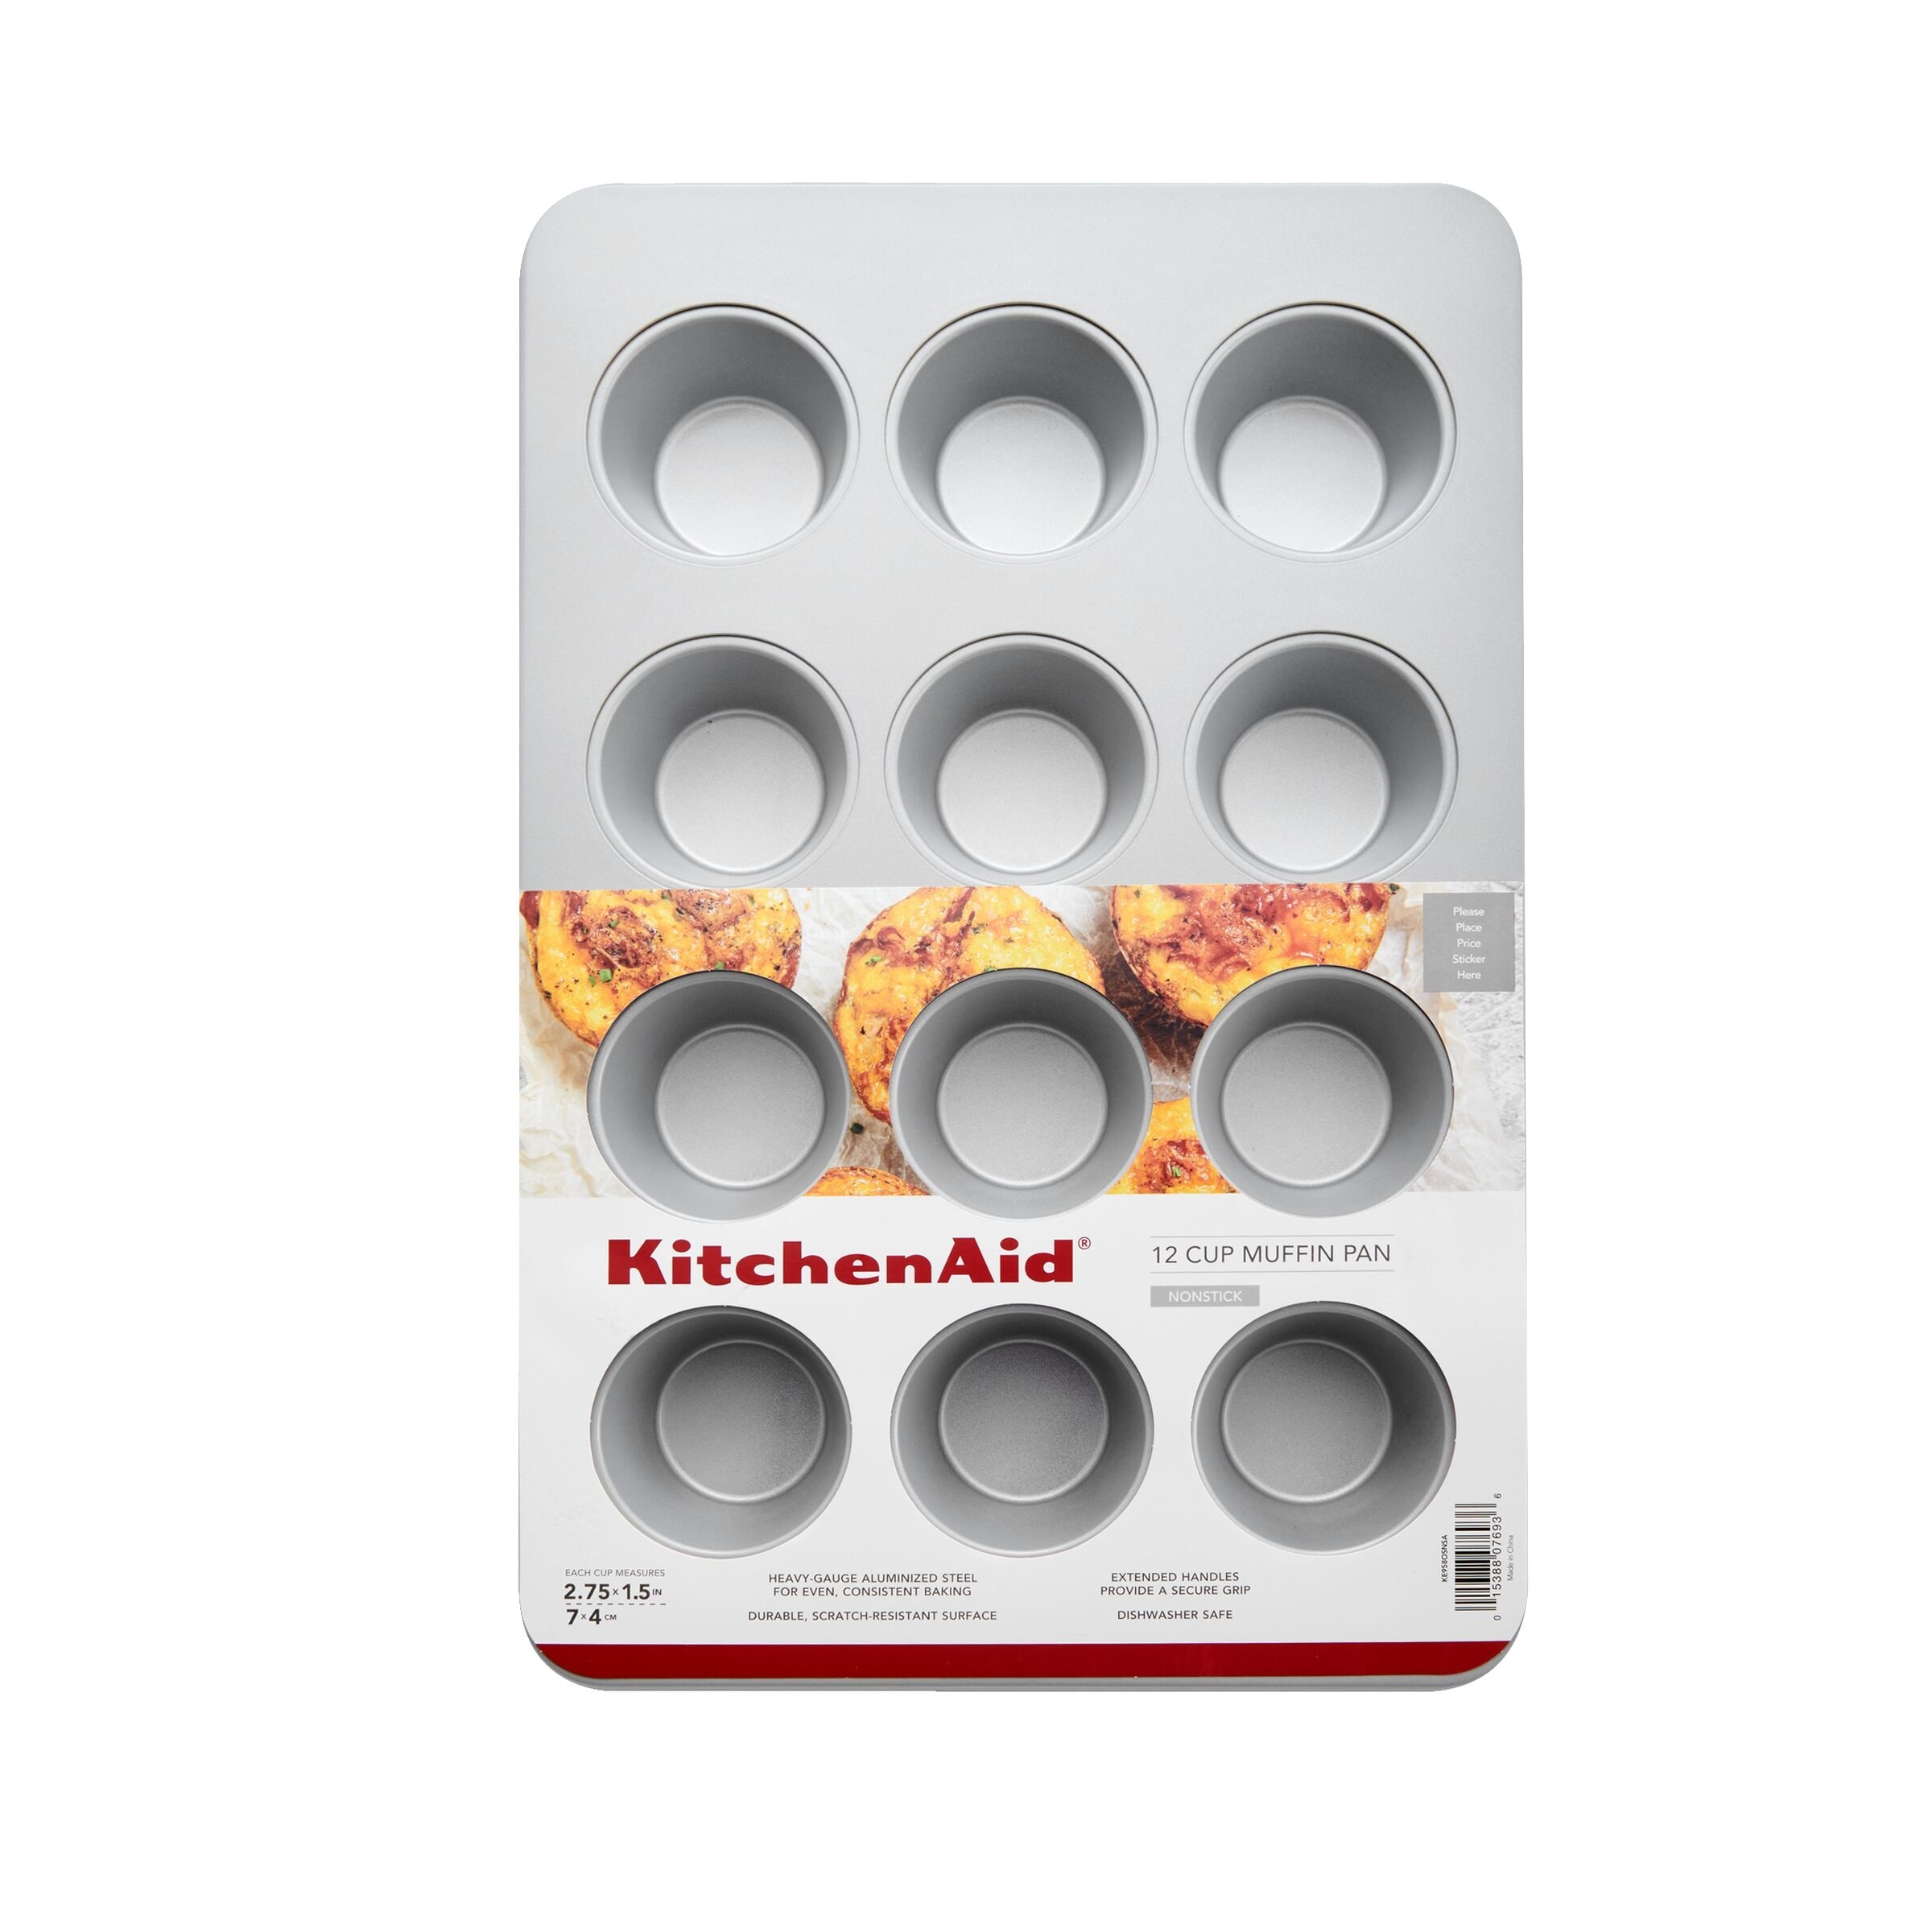 https://ak1.ostkcdn.com/images/products/is/images/direct/fcf78bfec88cc1f2a8db53b824a2609b02583dc3/KitchenAid-Nonstick-12-cup-Muffin-Pan%2C-Silver.jpg